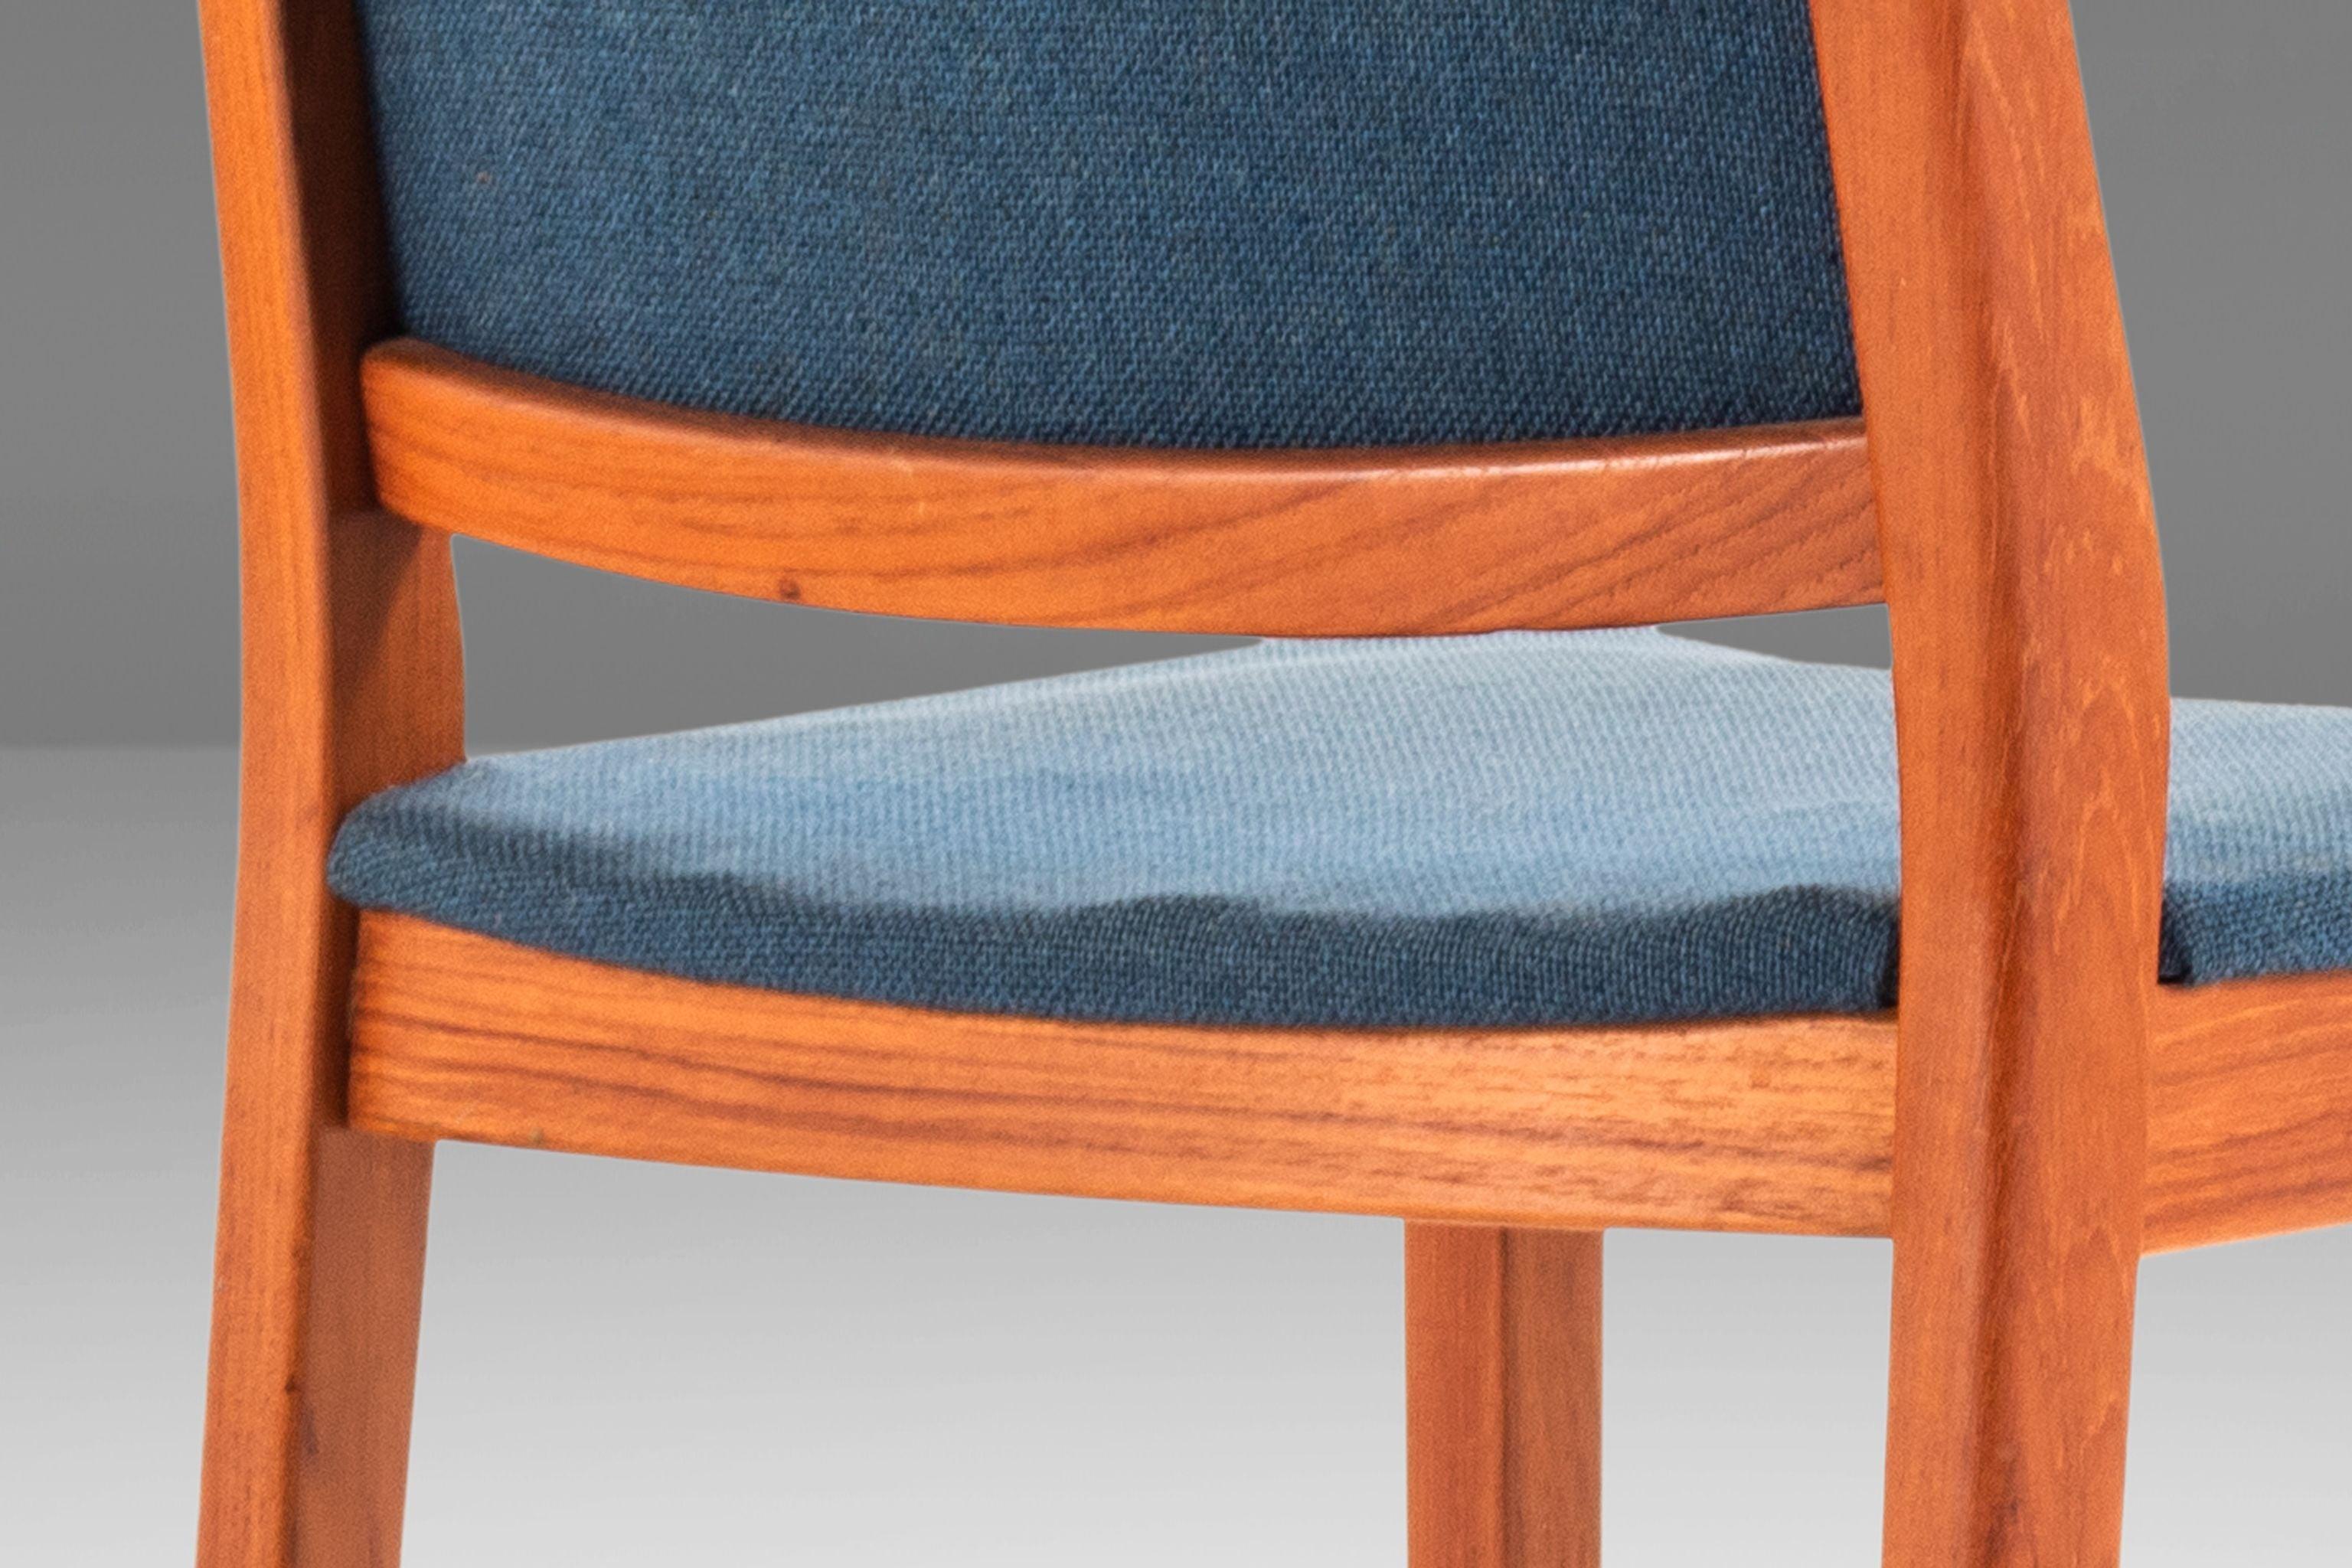 Set of 2 Side Chairs / Dining Chairs in Teak for Skaraborgs Sweden, c. 1960's For Sale 5